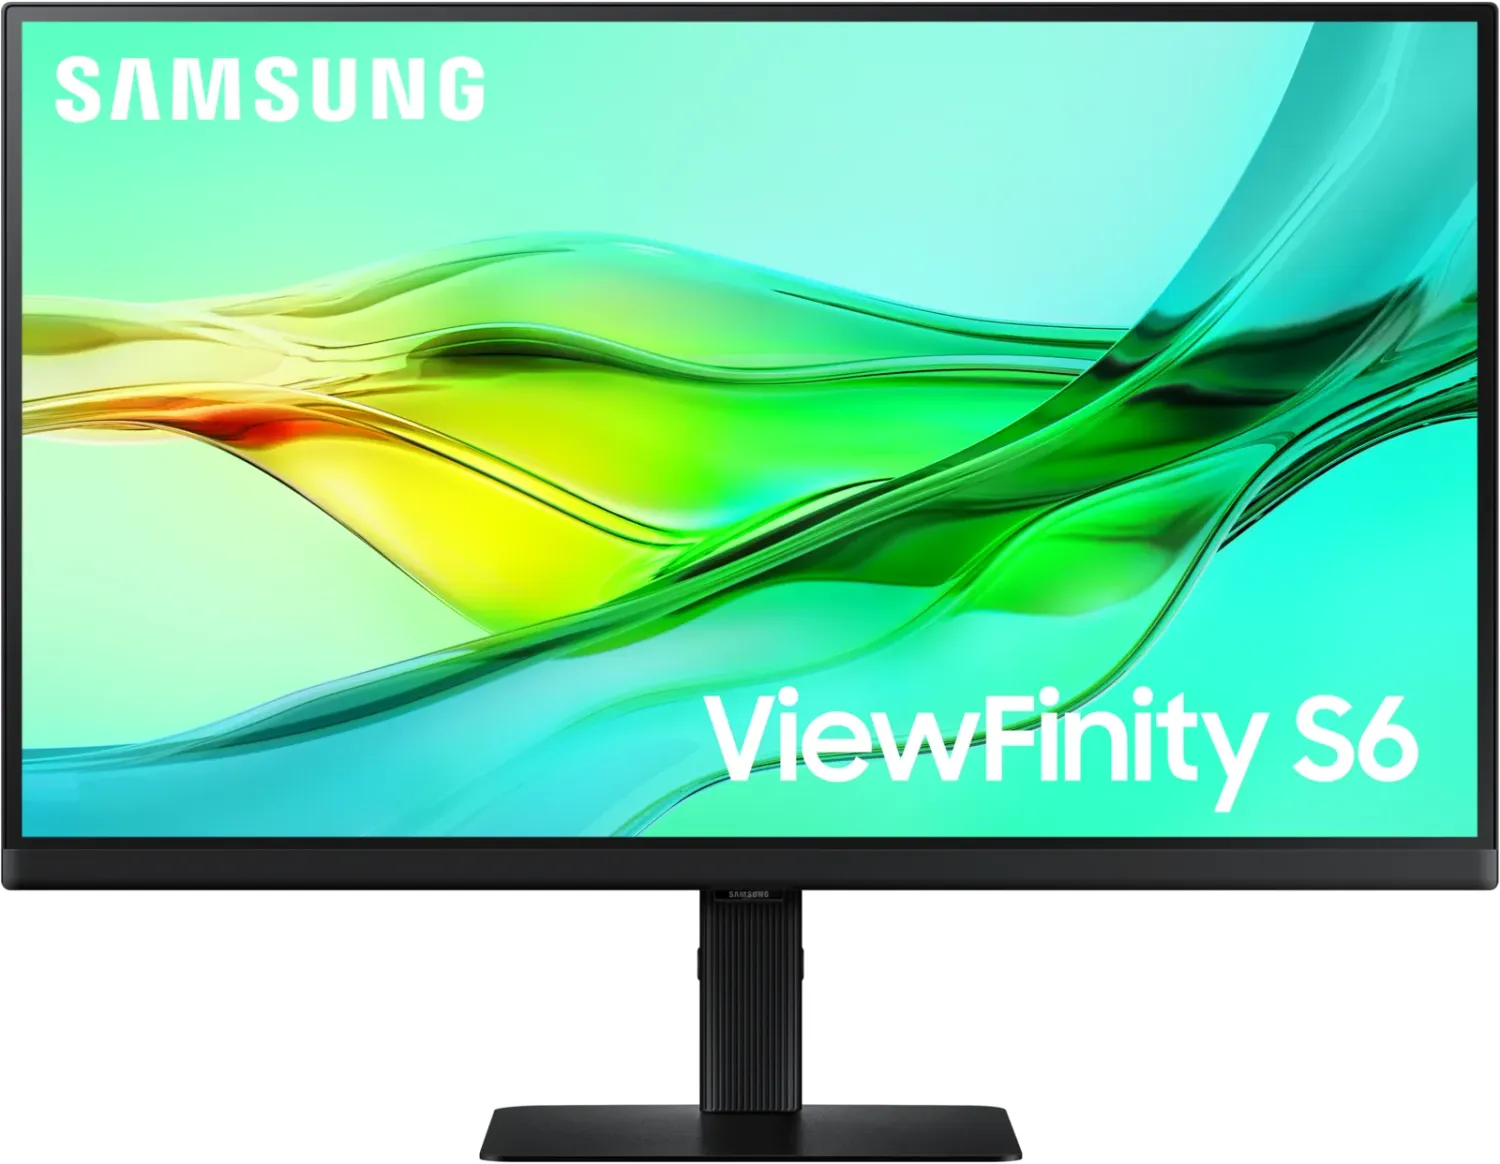 Samsung ViewFinity S6 Monitor S60UD (27") (LS27D600UAUXEN)